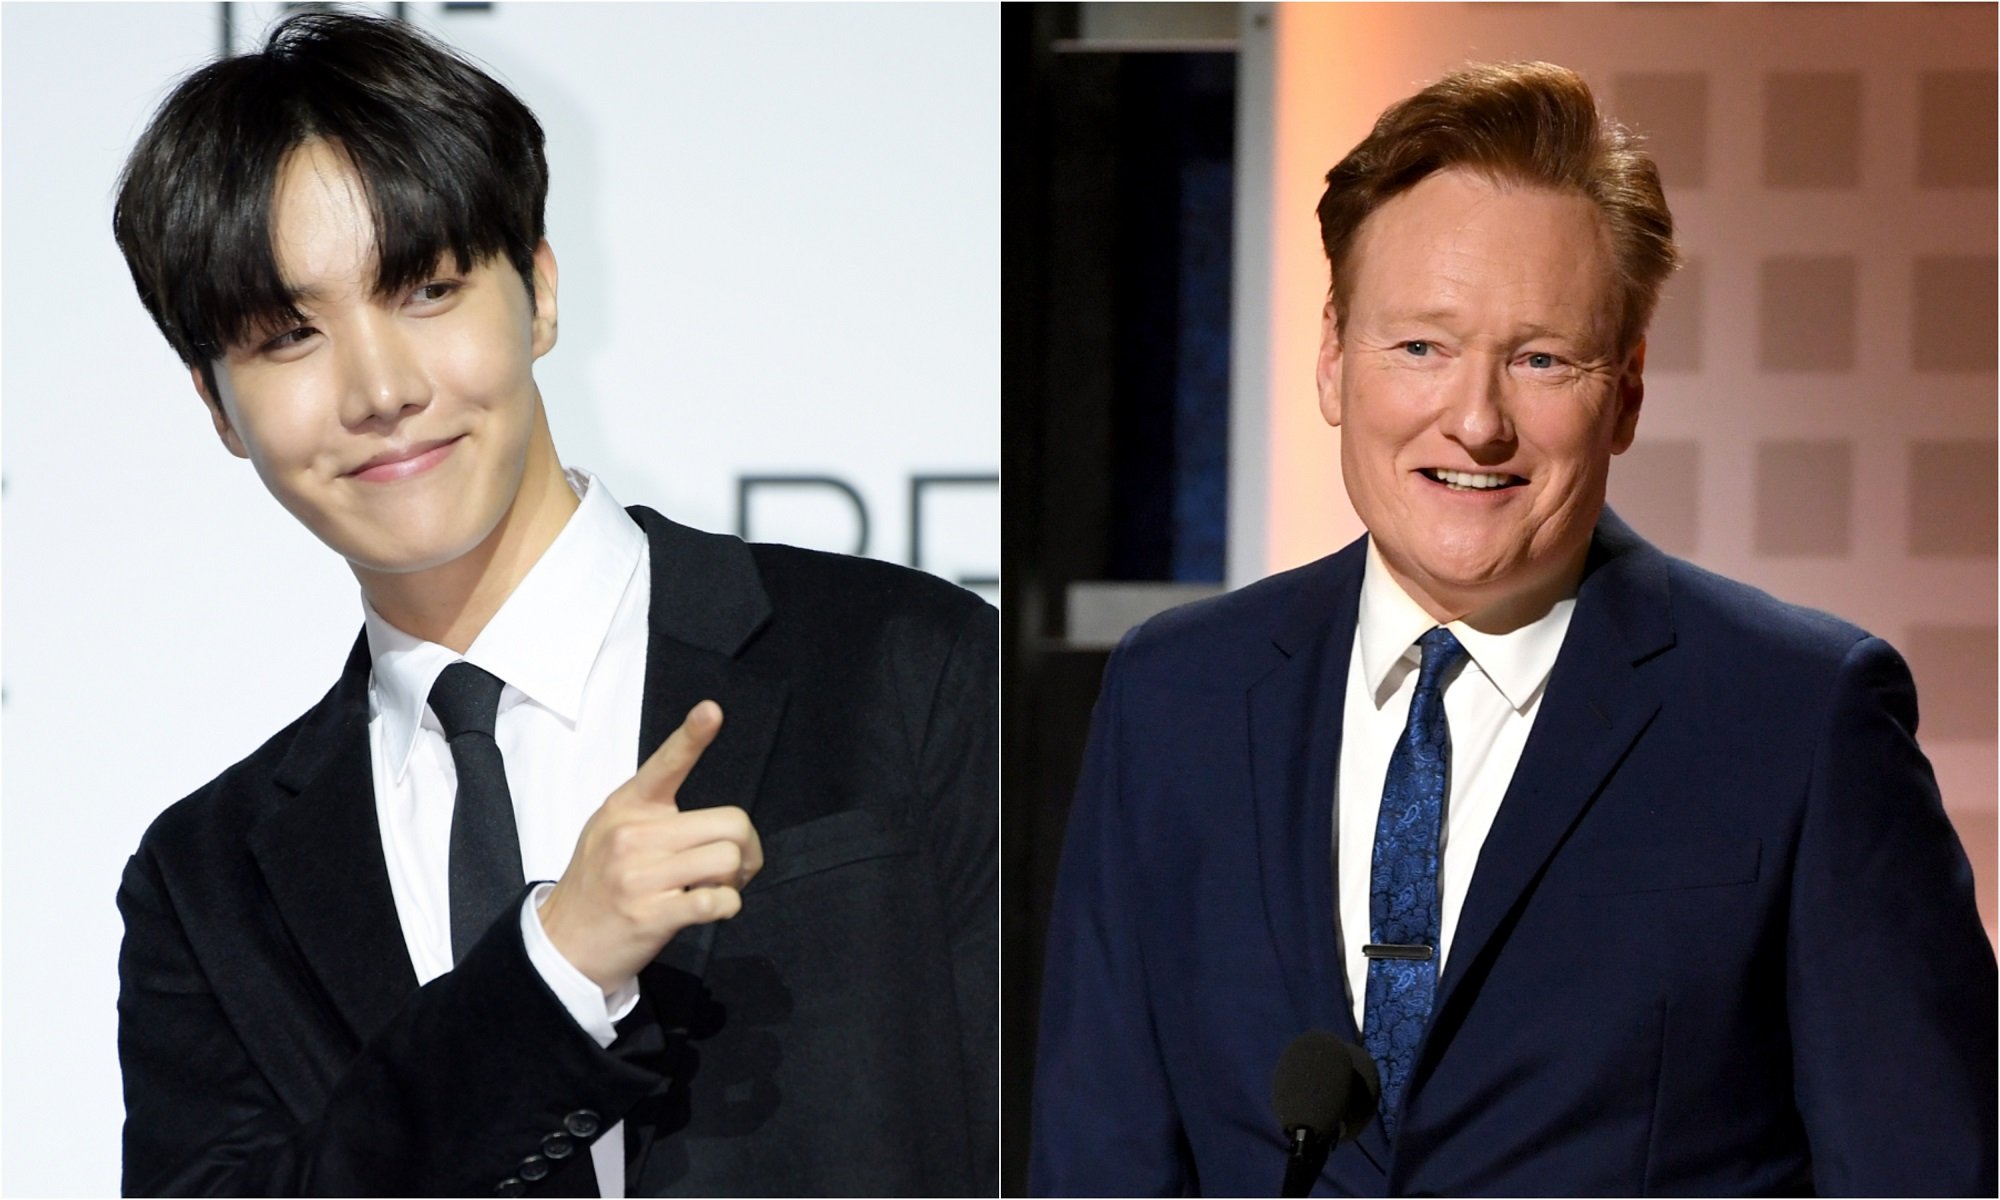 J-Hope of BTS during BTS' 'BE (Deluxe Edition)' press conference and Conan O'Brien during AARP The Magazine's 19th Annual Movies For Grownups Awards